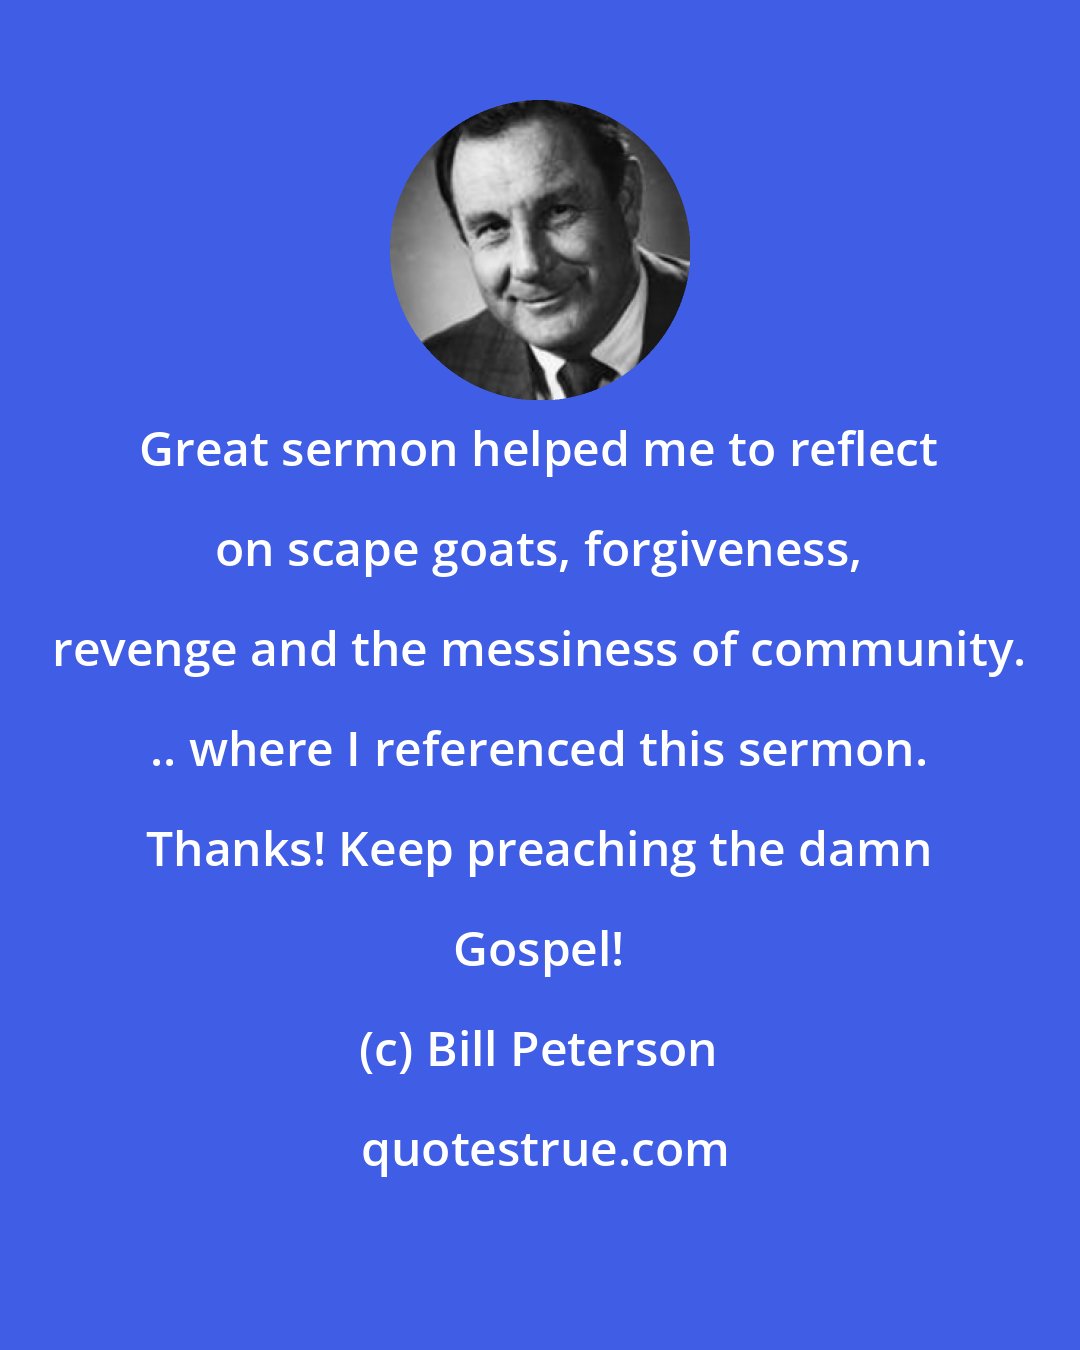 Bill Peterson: Great sermon helped me to reflect on scape goats, forgiveness, revenge and the messiness of community. .. where I referenced this sermon. Thanks! Keep preaching the damn Gospel!